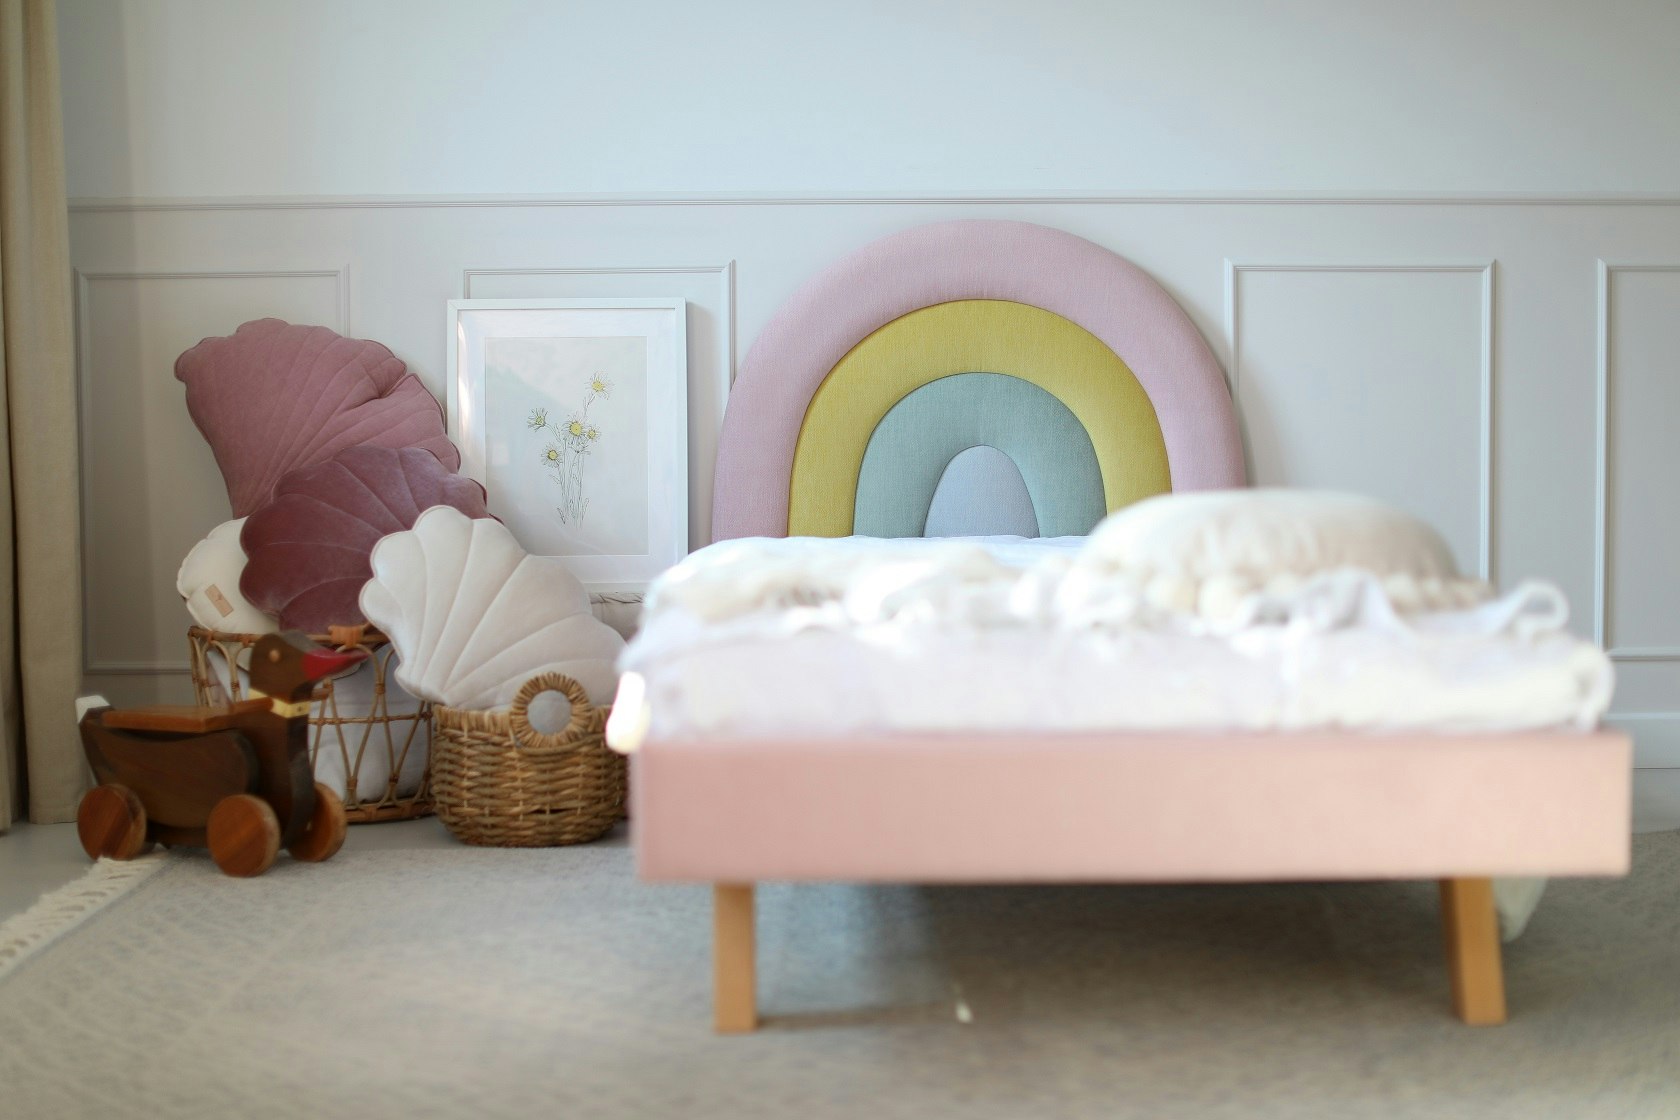 Headboard for the children's bed, Pastel rainbow 